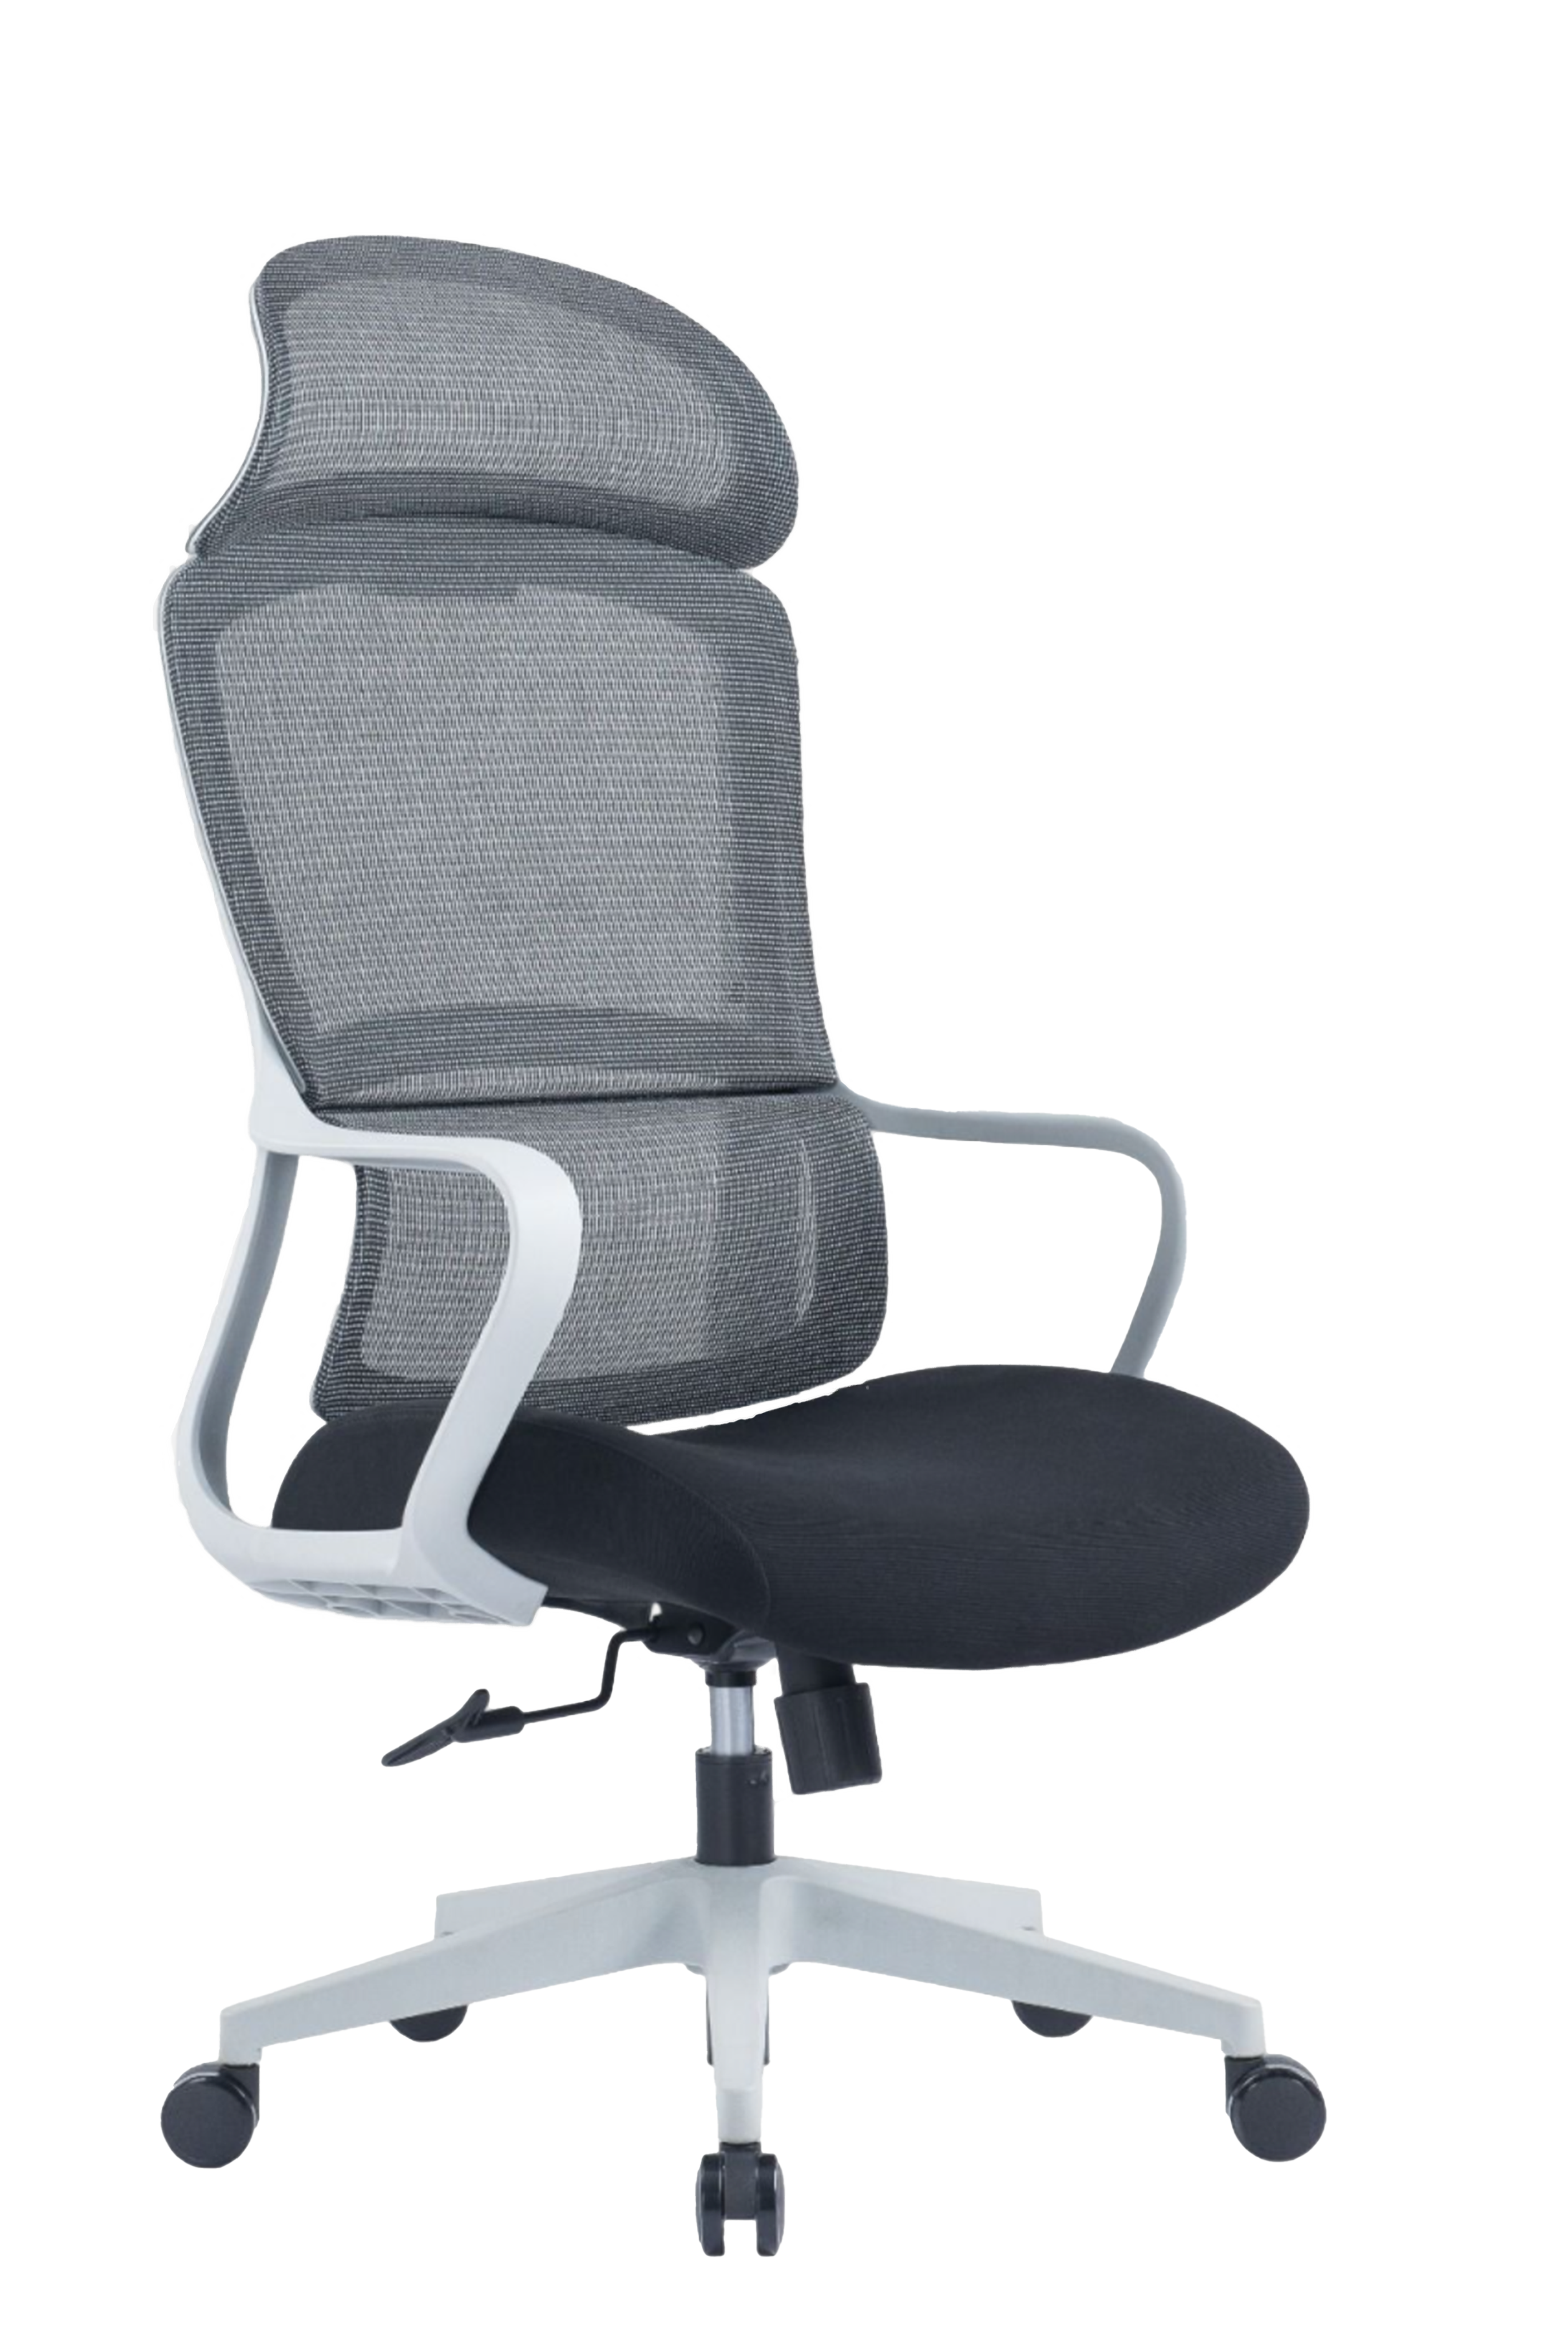 Leo High Back Ergonomic Office Chair With Cushion Seat And Nylon Base - Grey